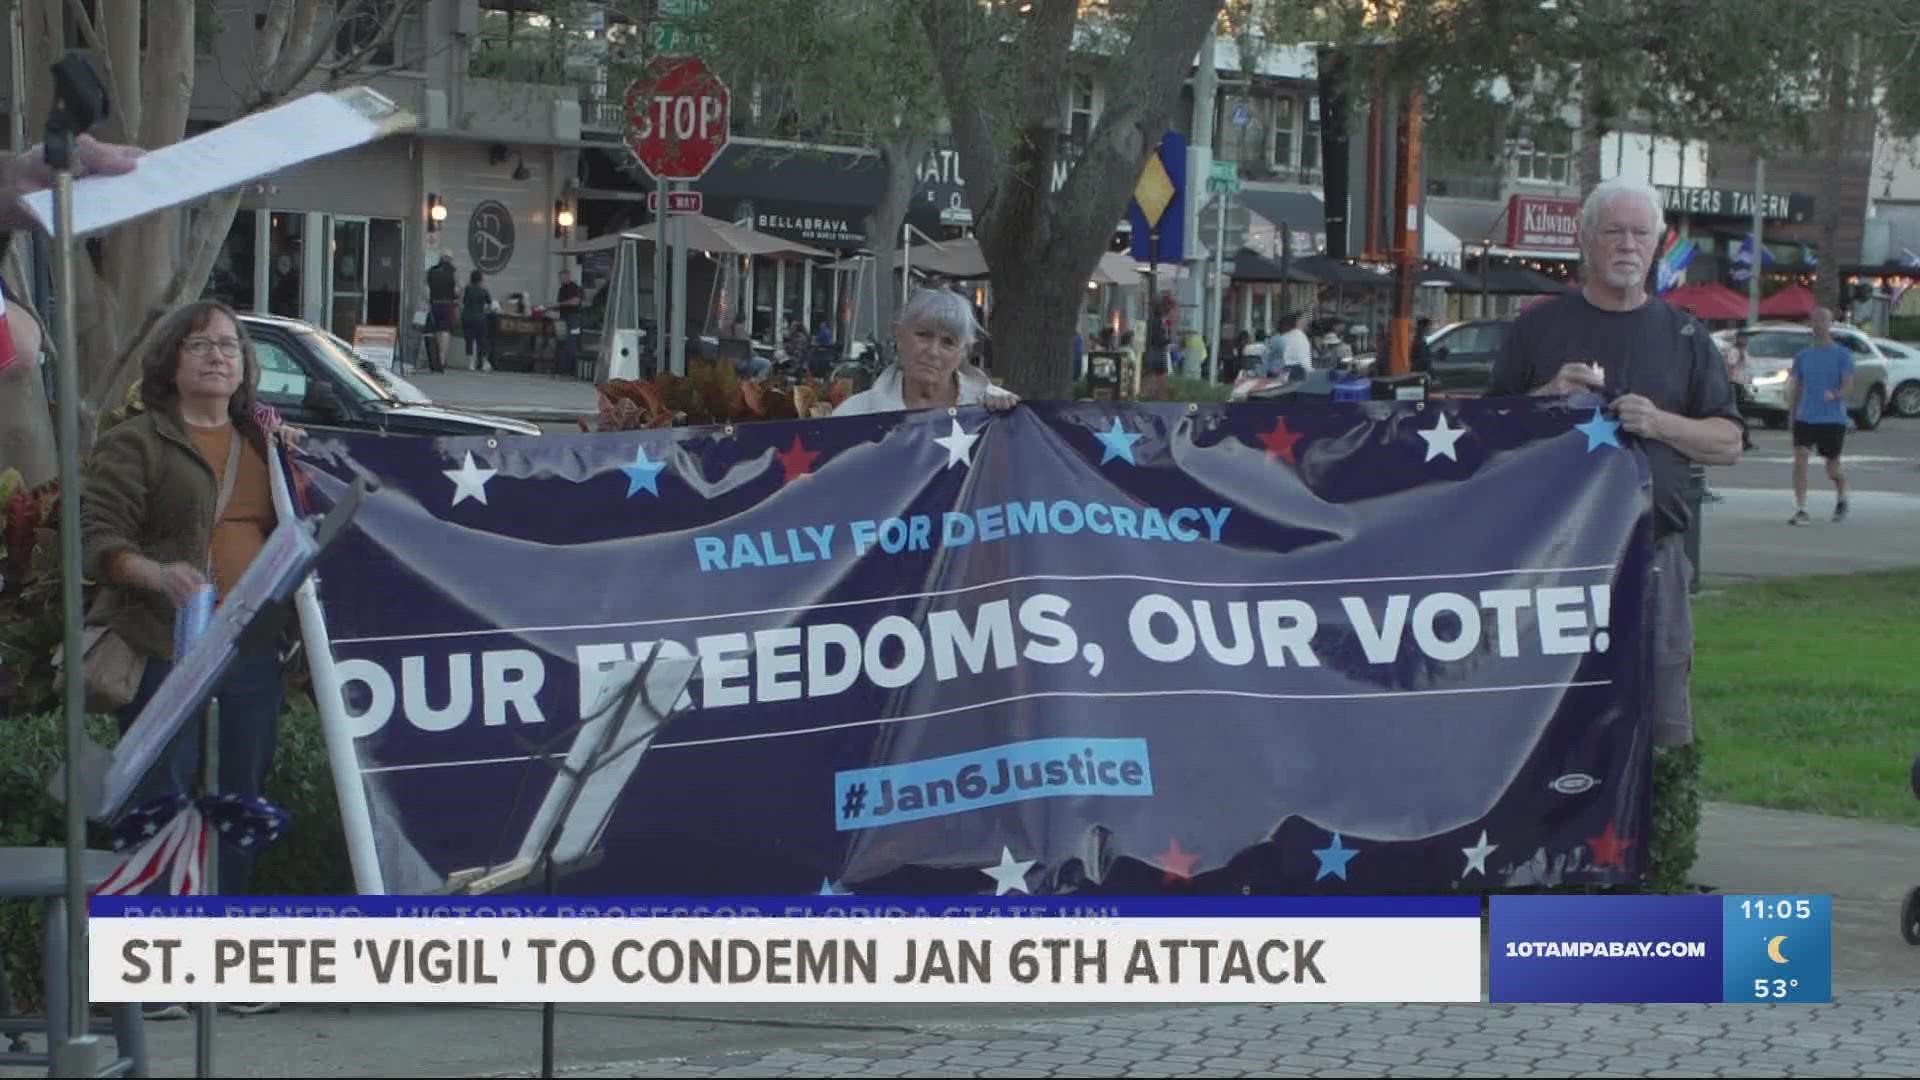 Vigil organizers and attendees called for those who participated in the insurrection to be held accountable and for stronger voting rights protections.